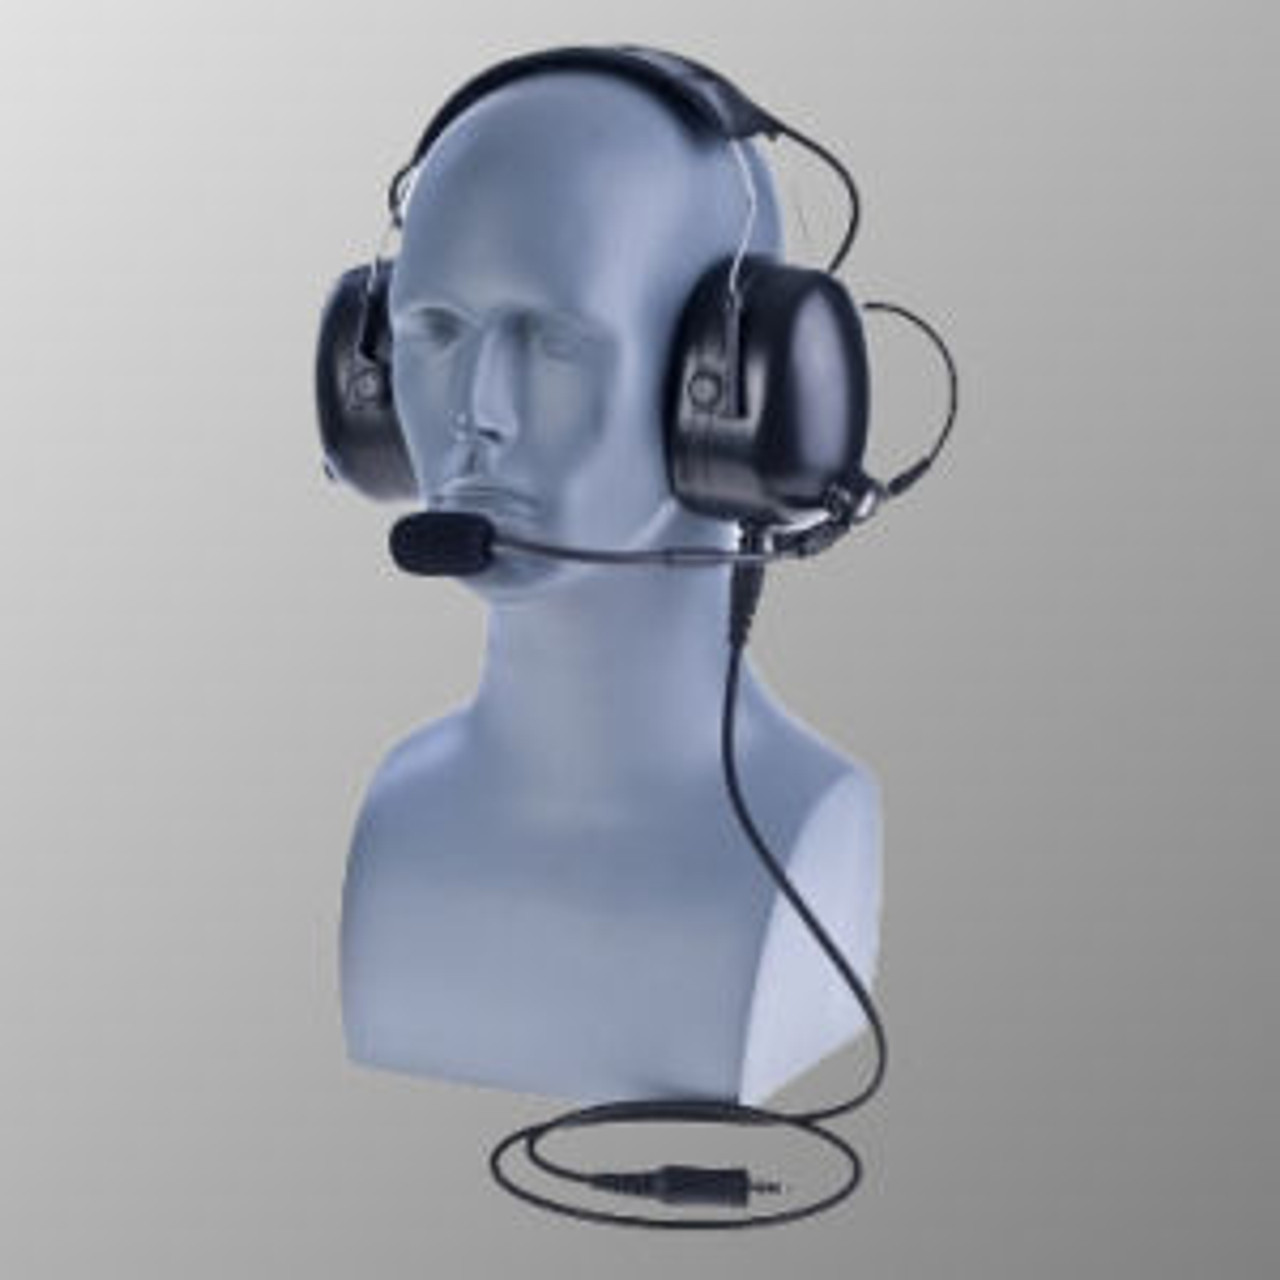 Motorola XPR7550e Over The Head Double Muff Headset With WIreless PTT